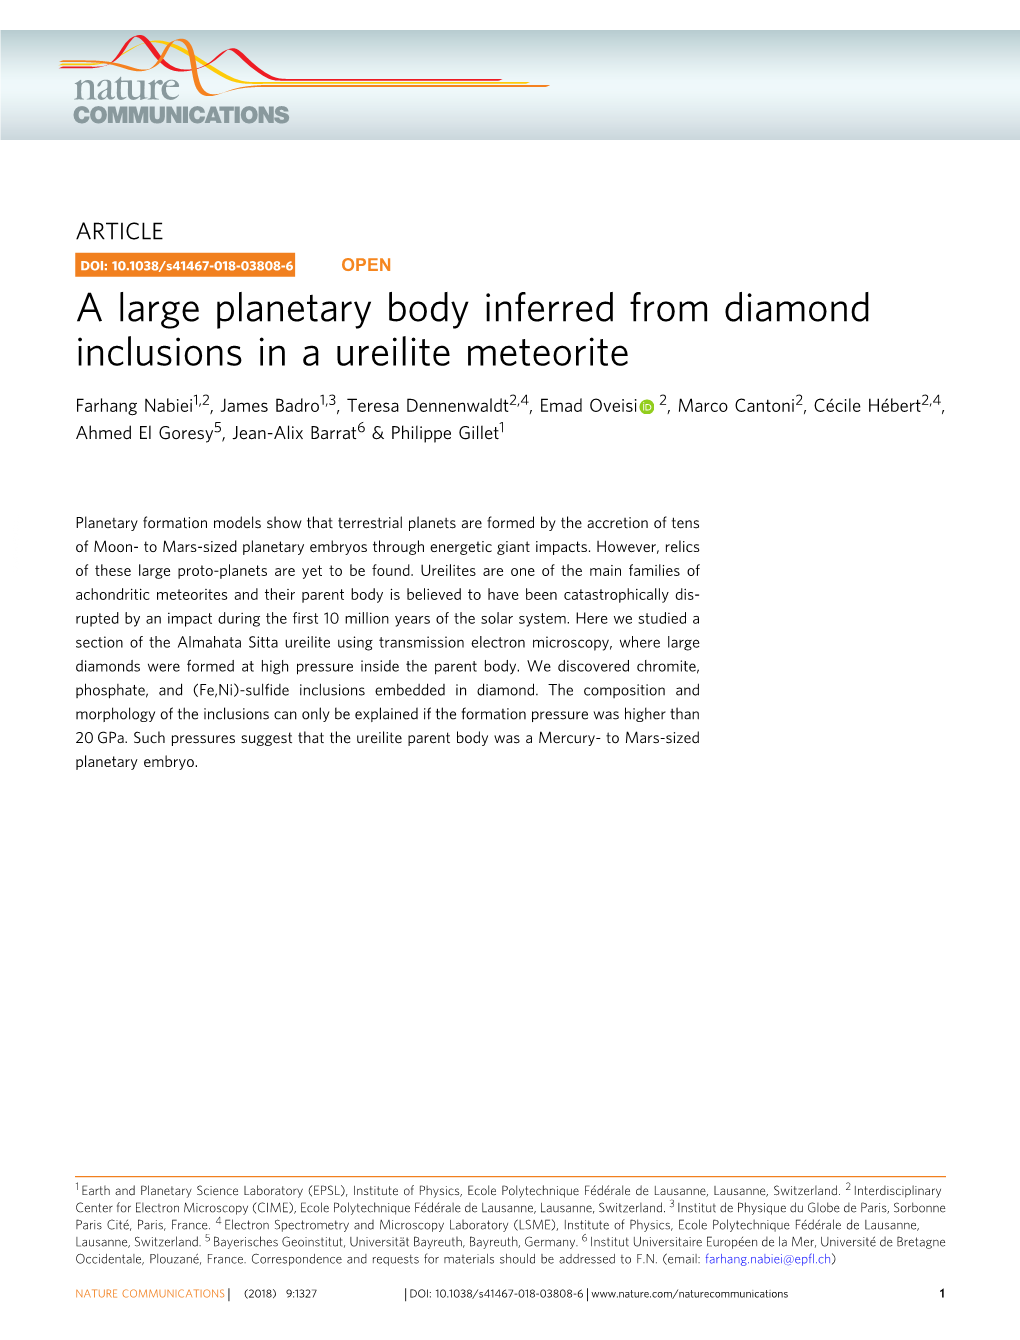 A Large Planetary Body Inferred from Diamond Inclusions in a Ureilite Meteorite